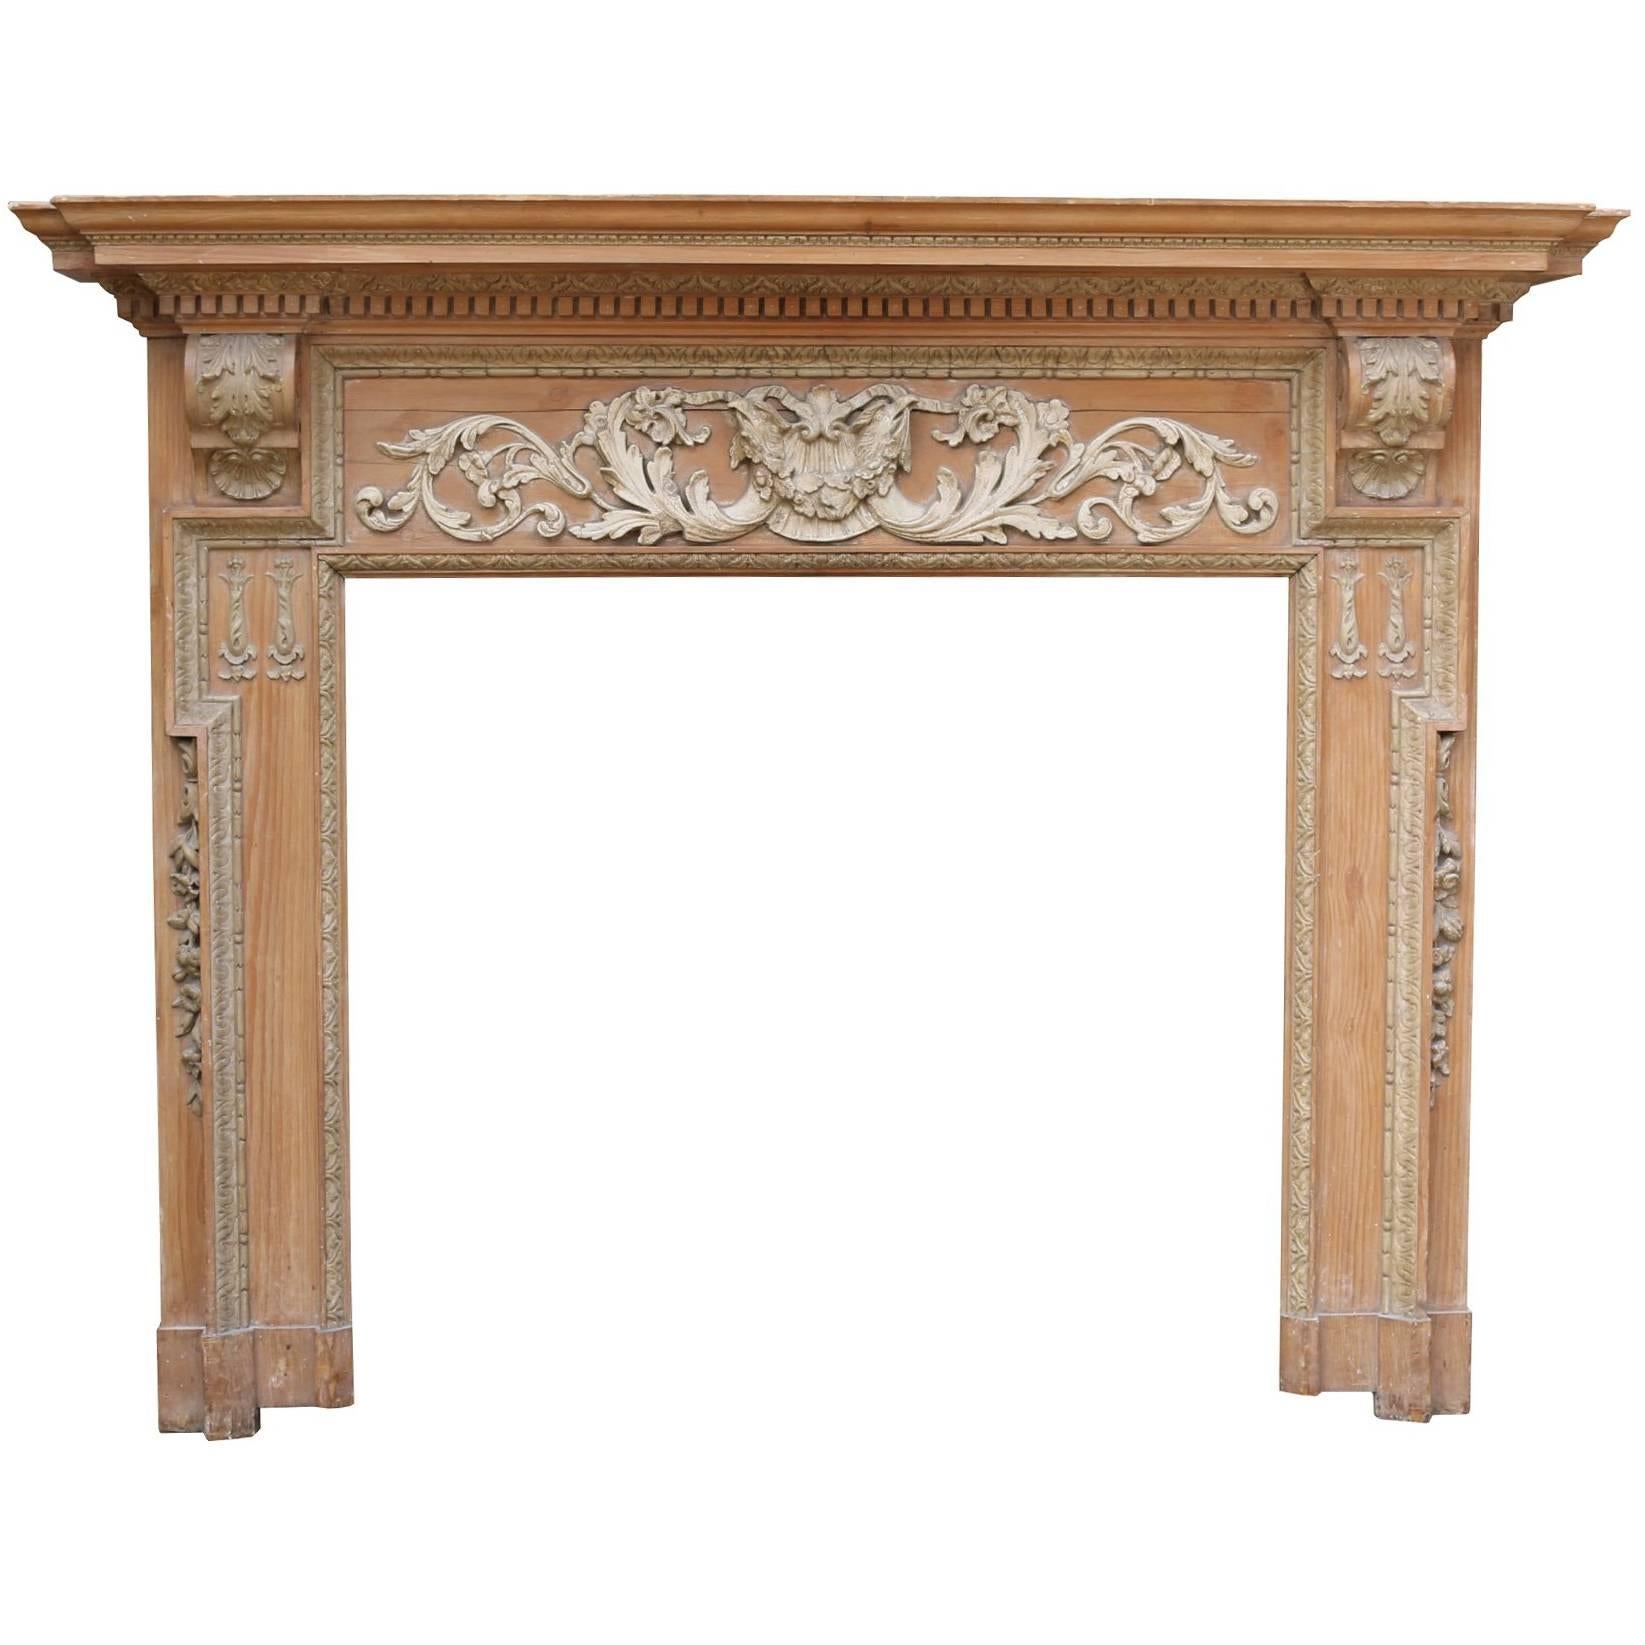 19th Century English Pine and Composition Fireplace